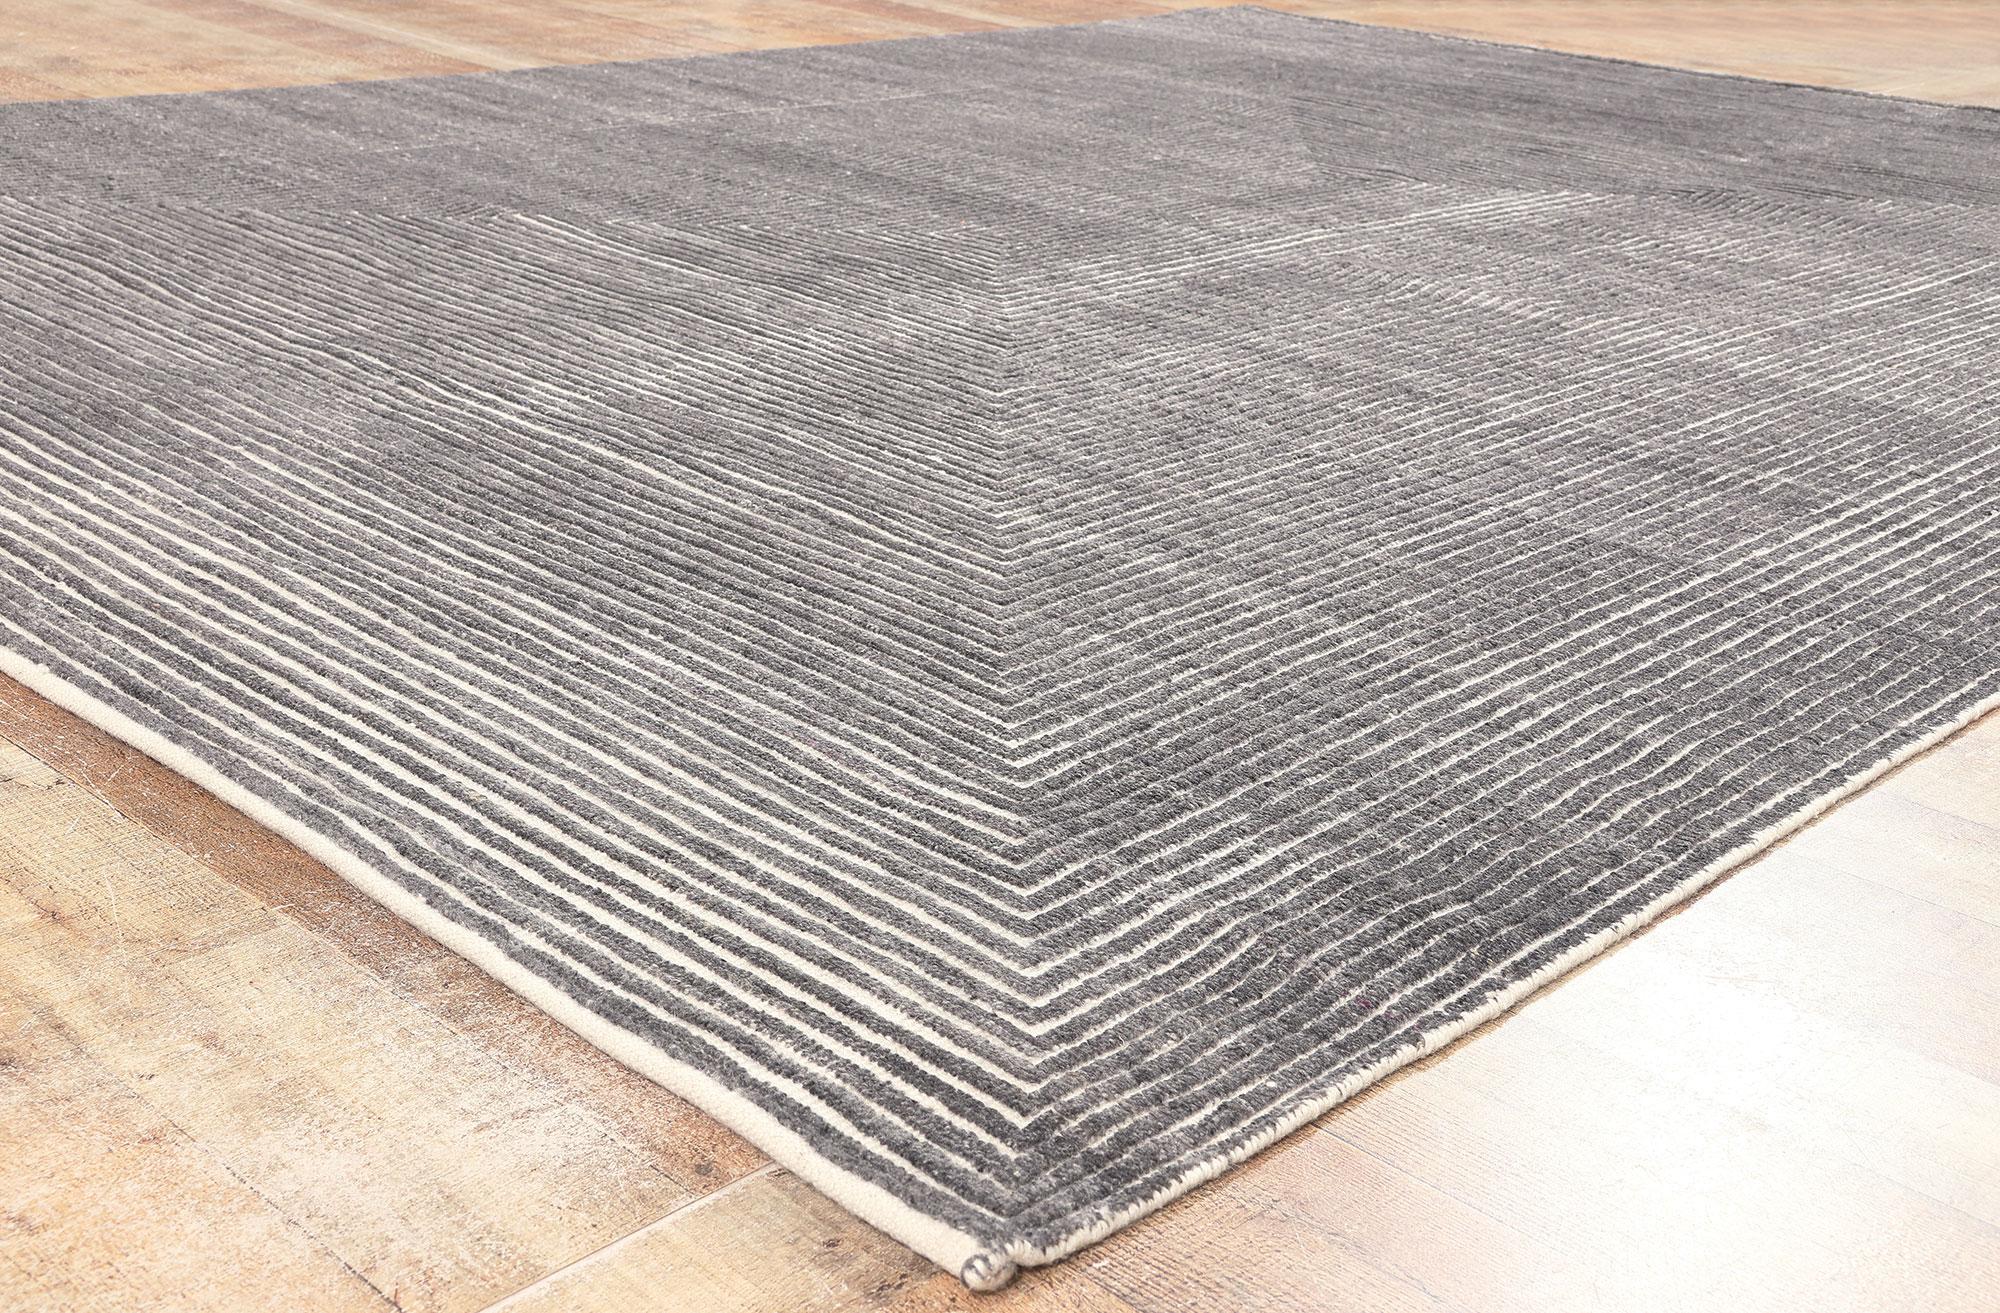 Wool Modern Gray Opt Art High-Low Rug, Sublime Simplicity Meets Tantalizing Texture For Sale